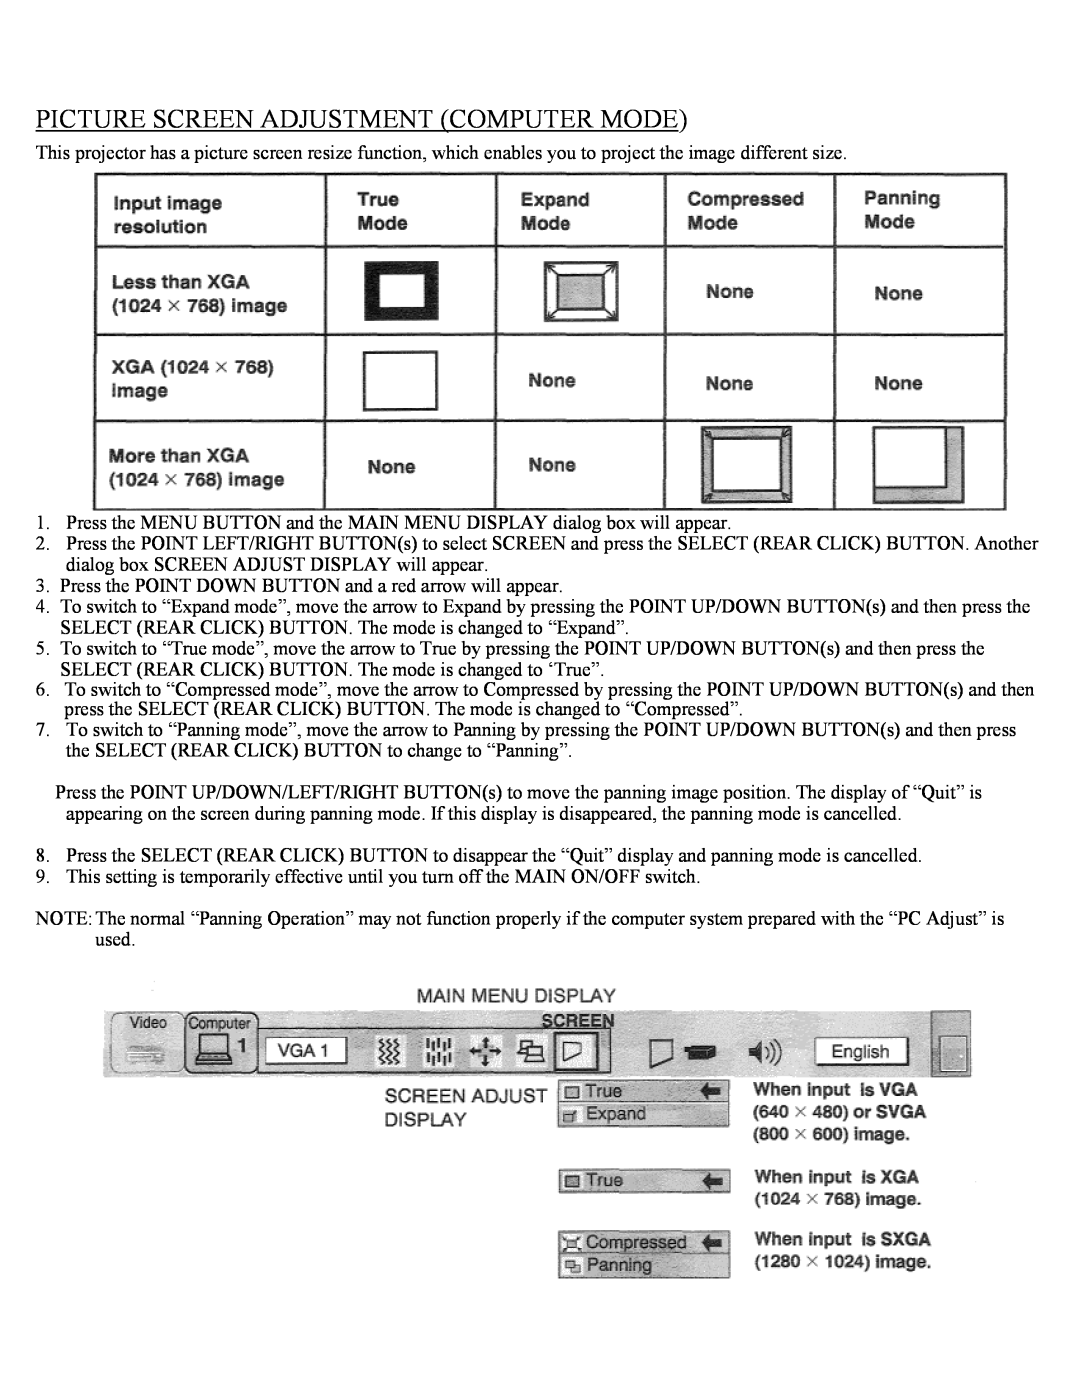 Eiki LC-X1UA, LC-X1UL instruction manual Picture Screen Adjustment Computer Mode 